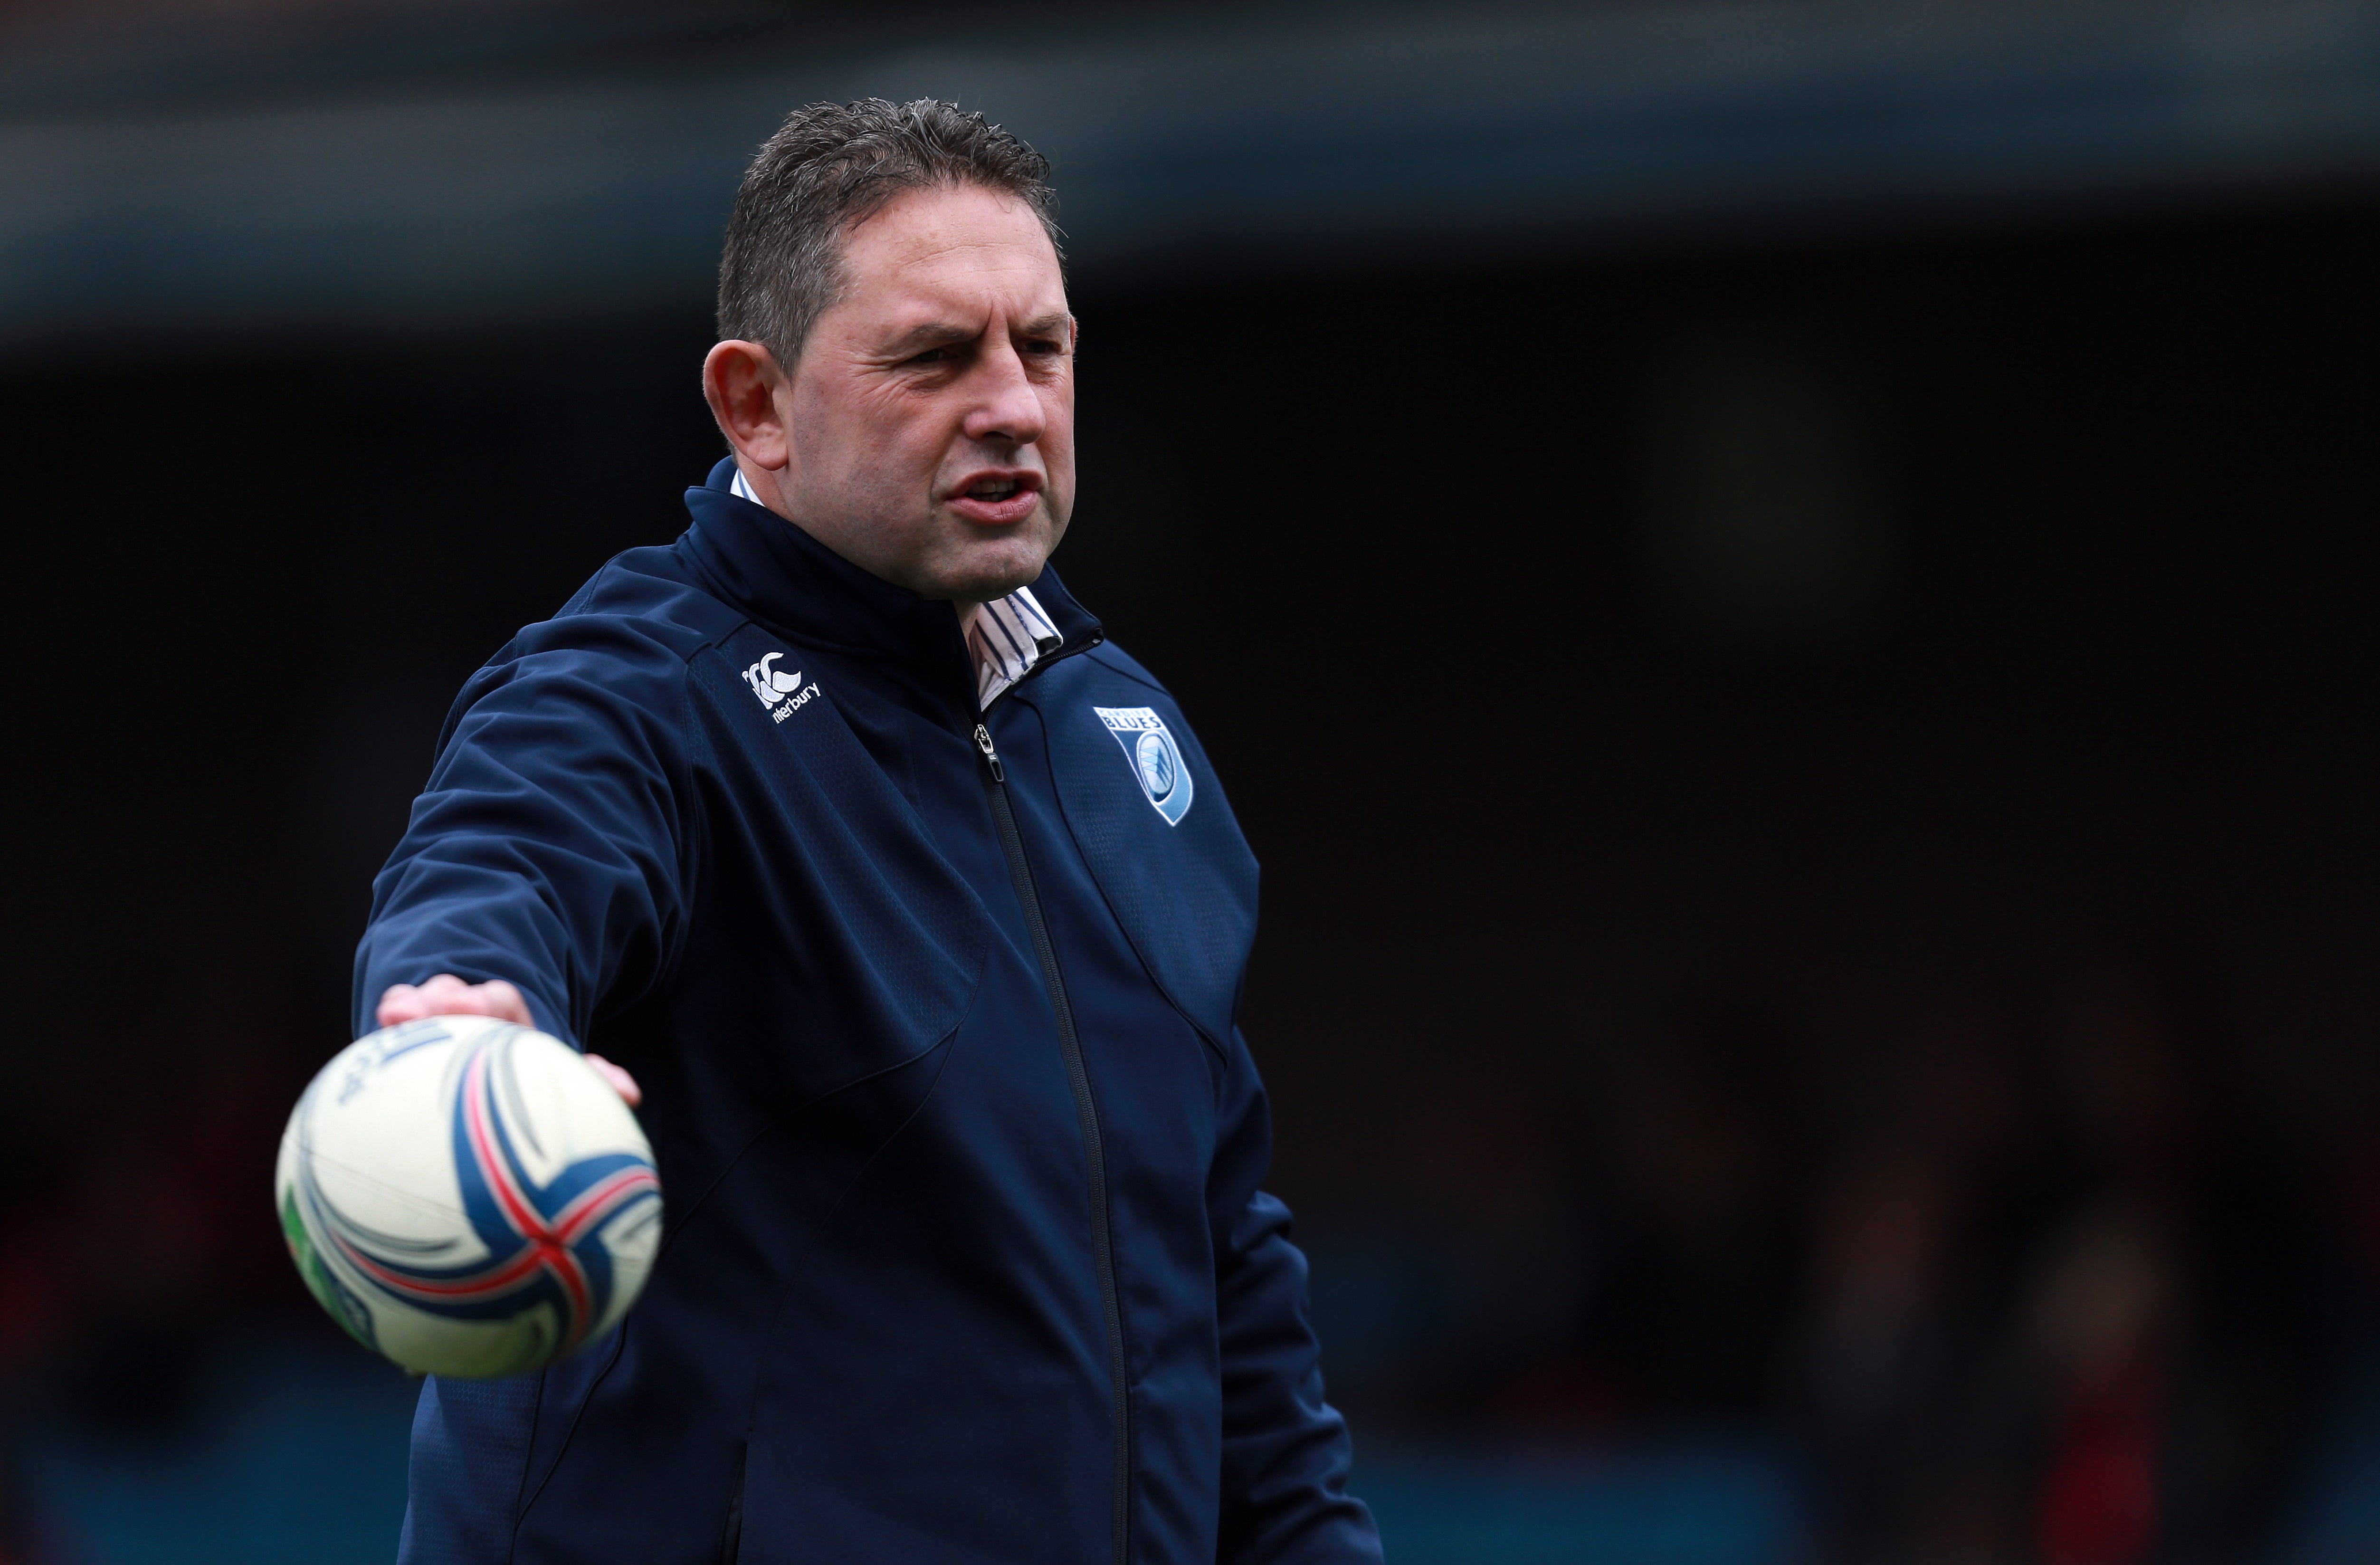 Davies’ coaching career has also included time with Cardiff